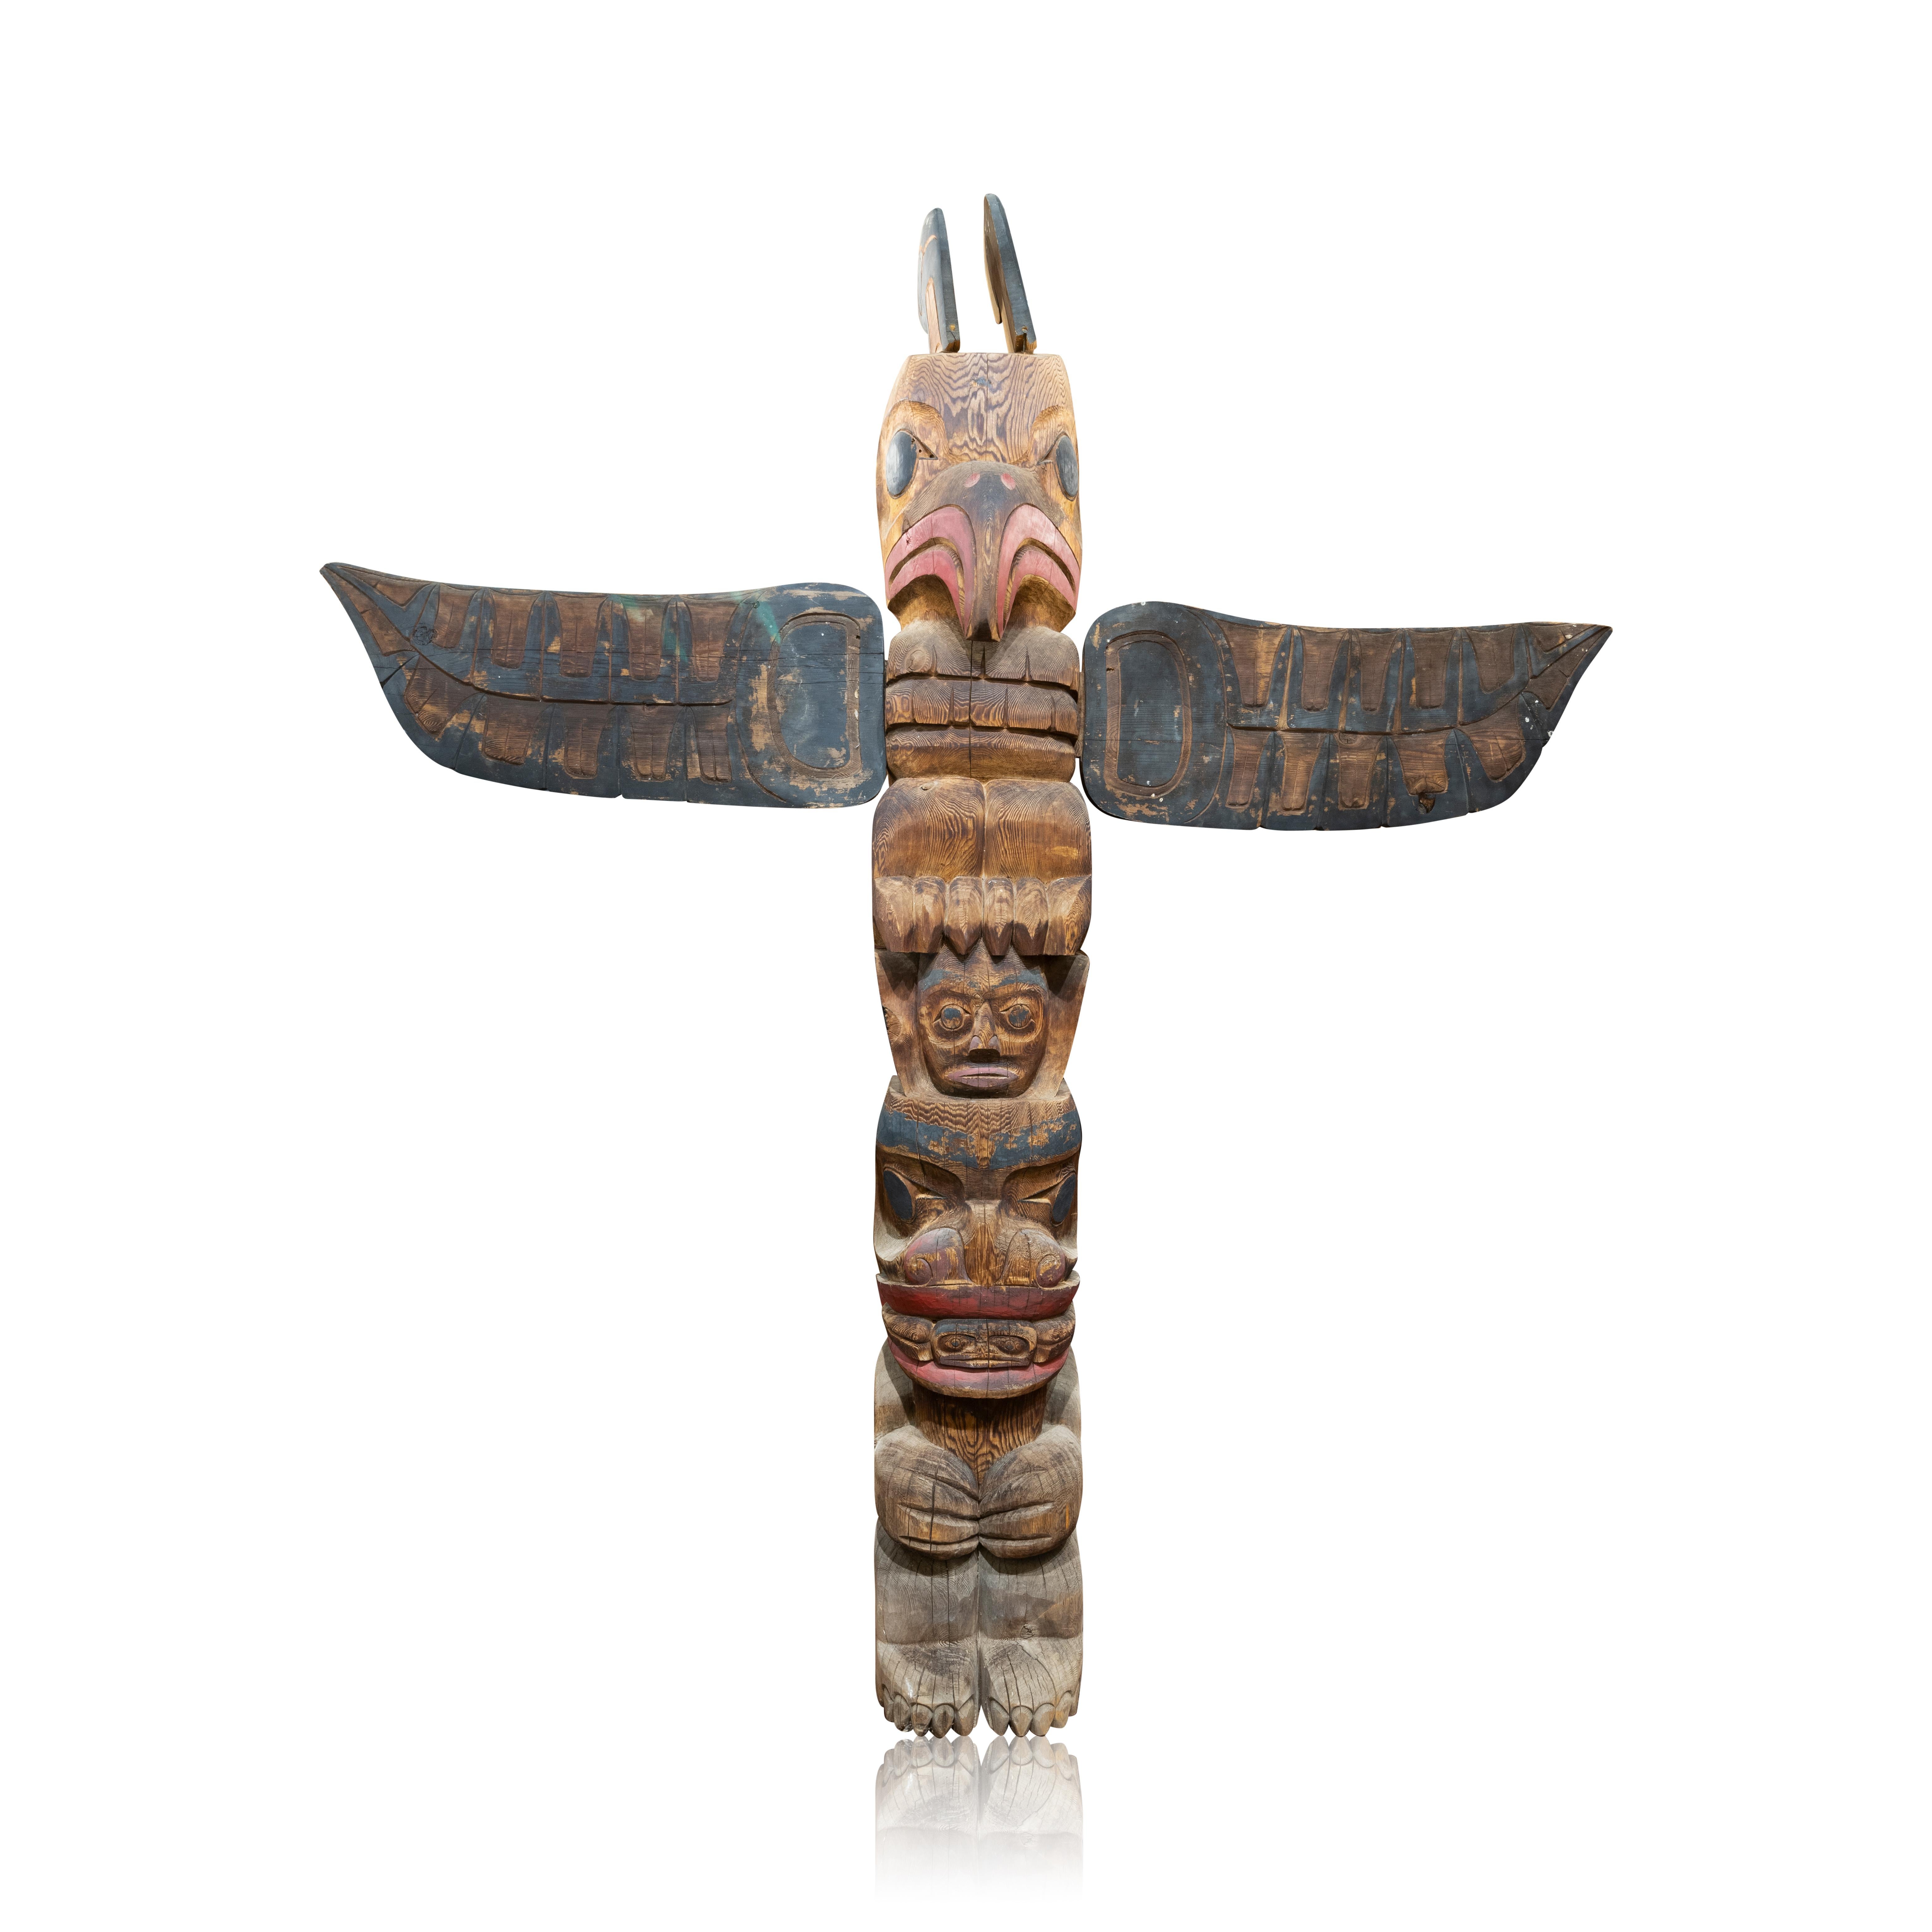 Matched pair of Salish Native American totem poles. Both identical. Carved as a thunderbird with spread rings separately carved and attached perched on the head of a human over a seated bear figure with a frog emerging from the ursine mouth.